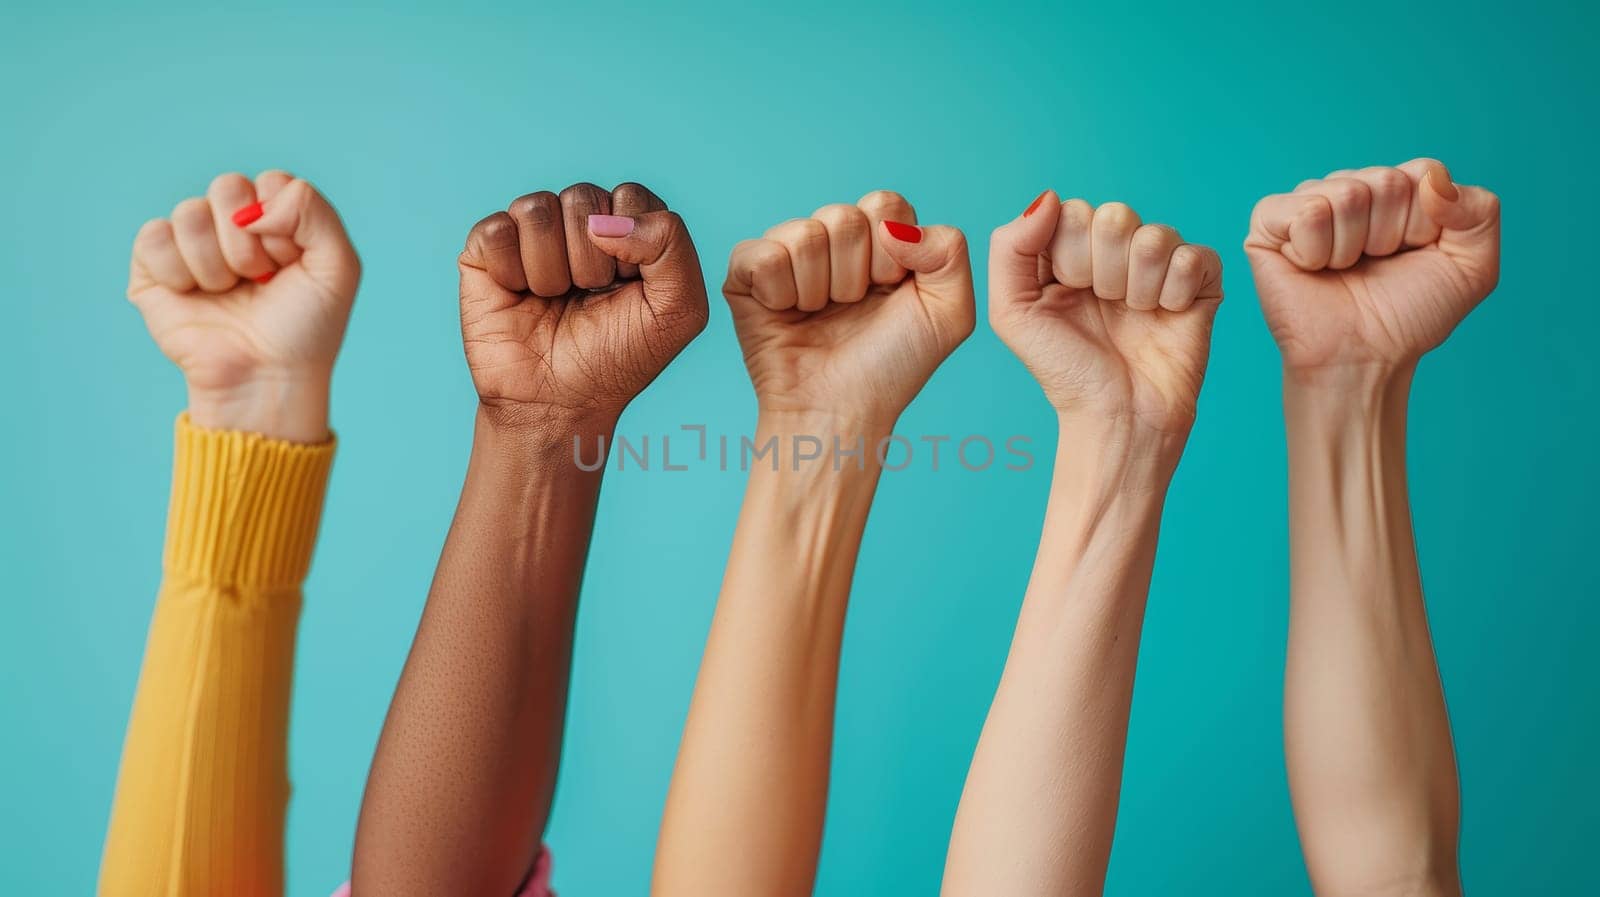 Human hands raising in the air to express their rights. Concept of labor and election movement. Isolated image with copy space.